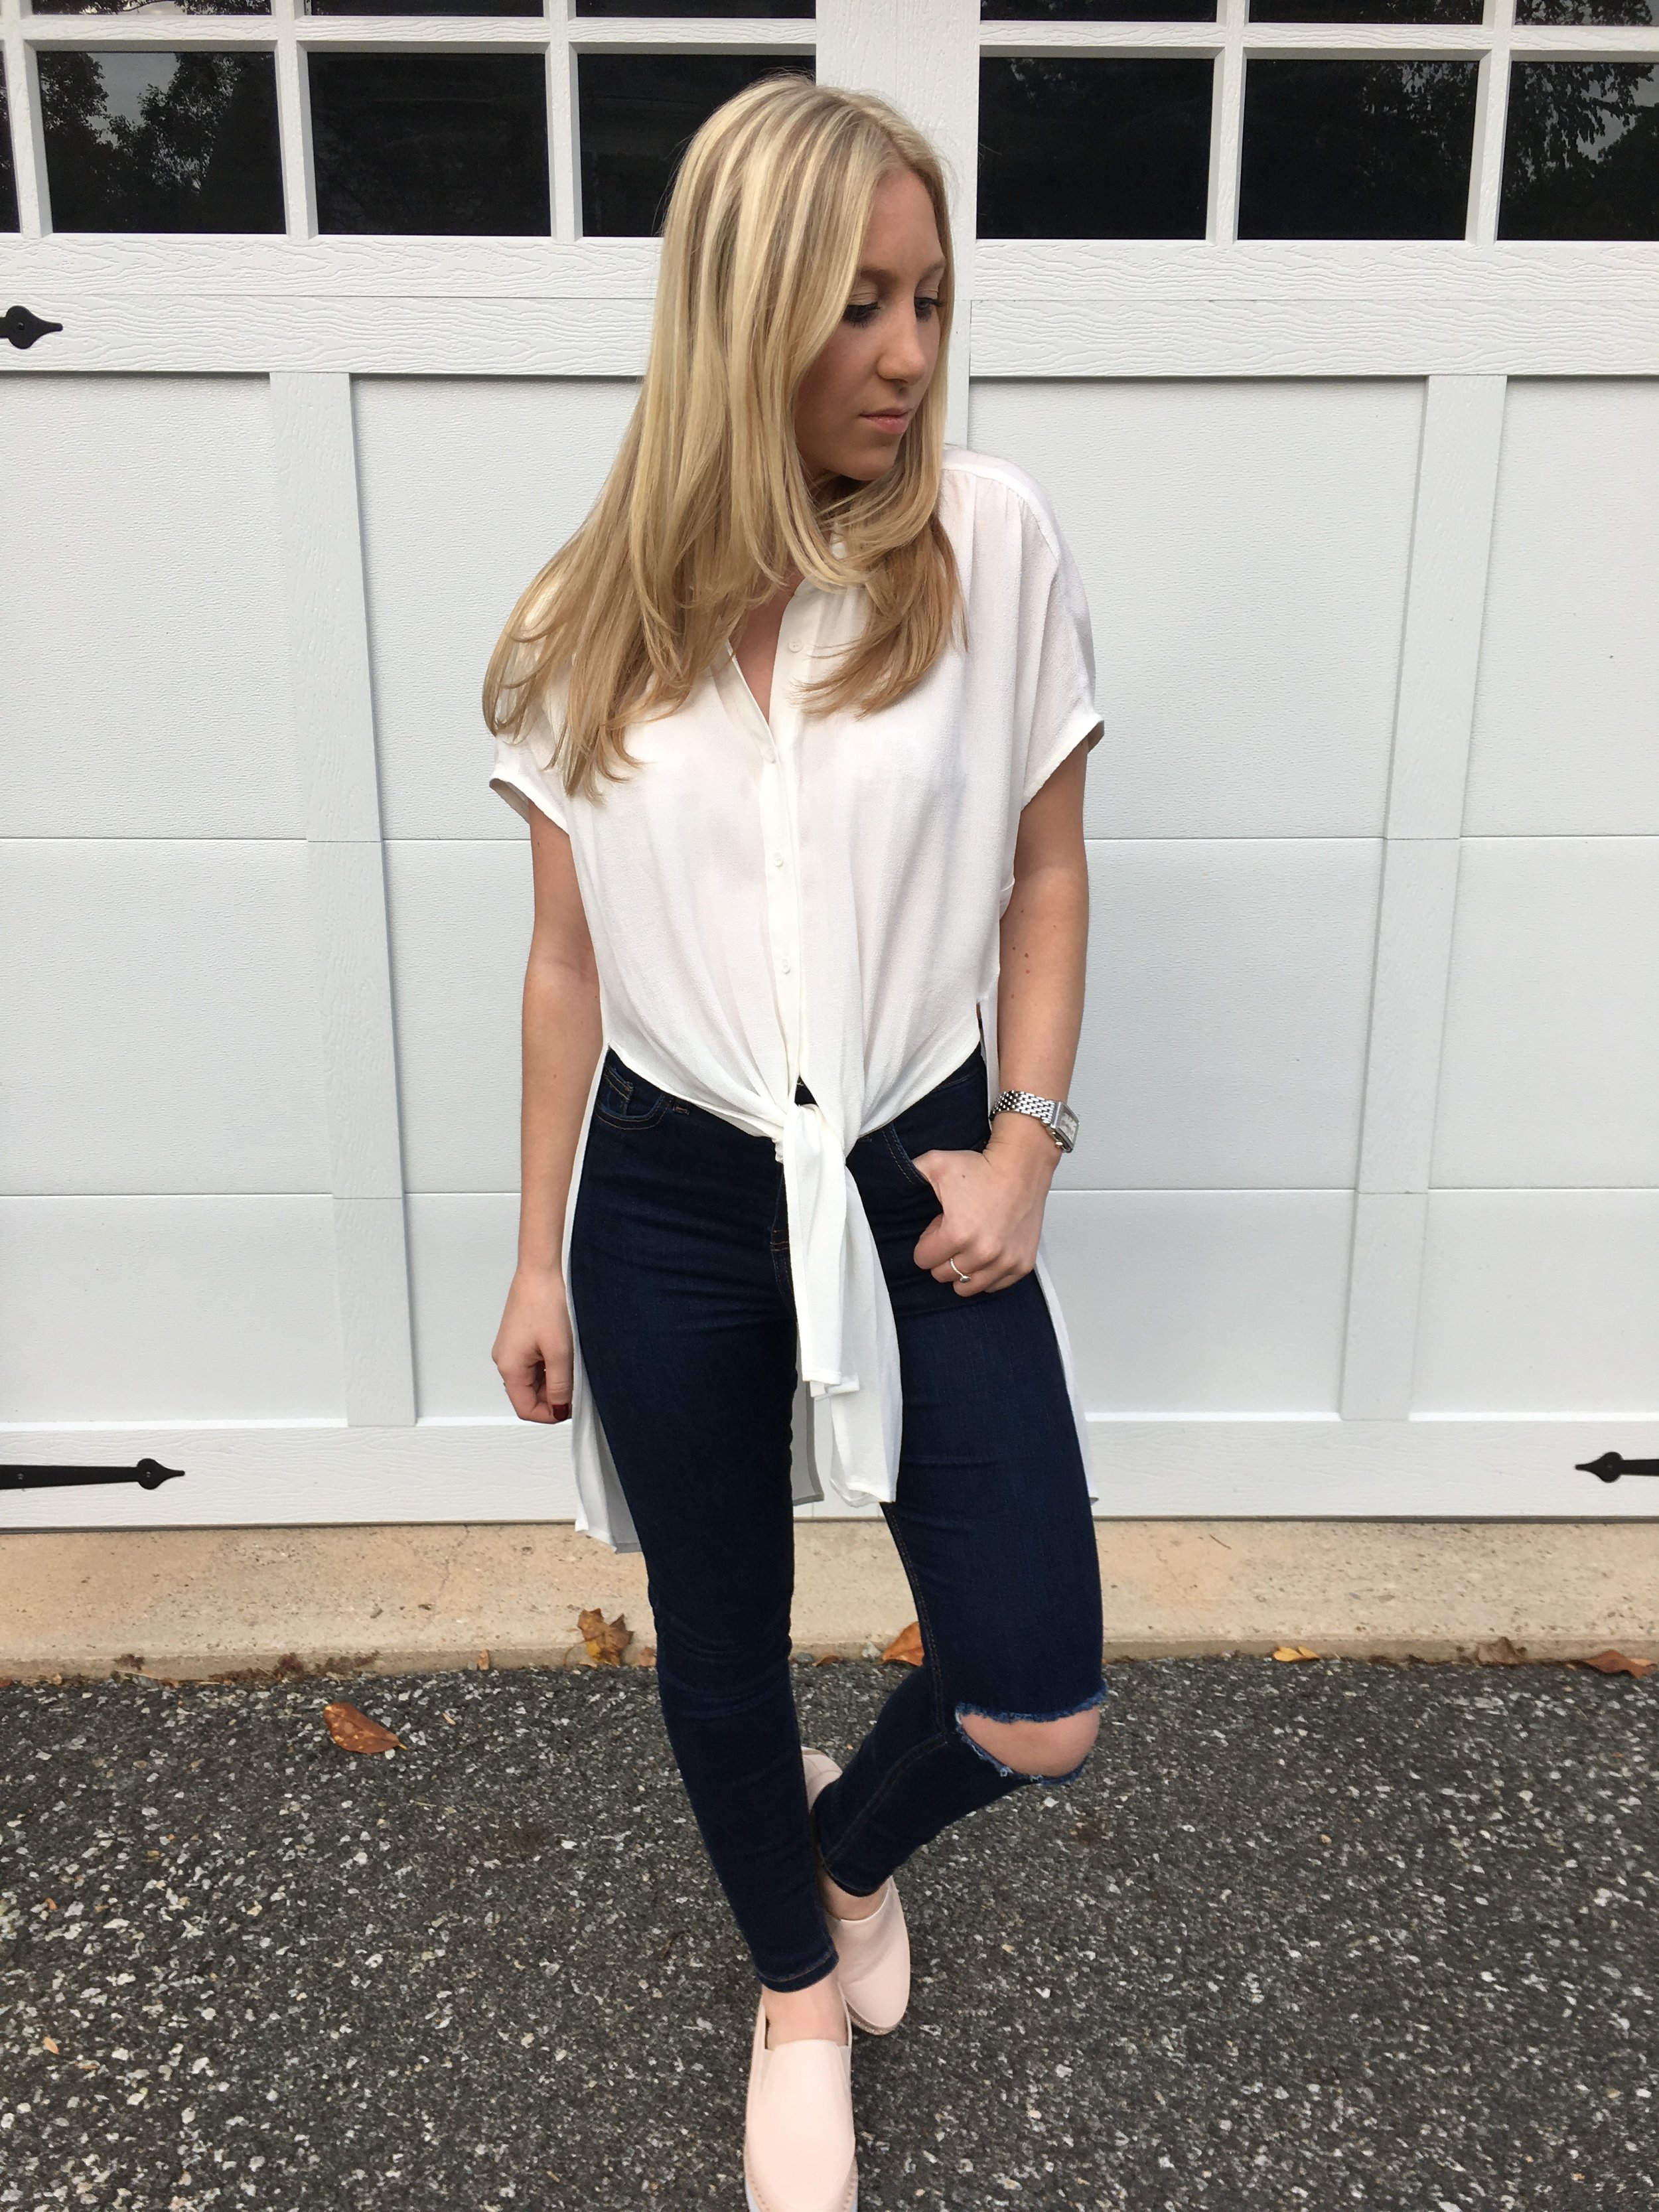 blush sneakers outfit inspo au courant life